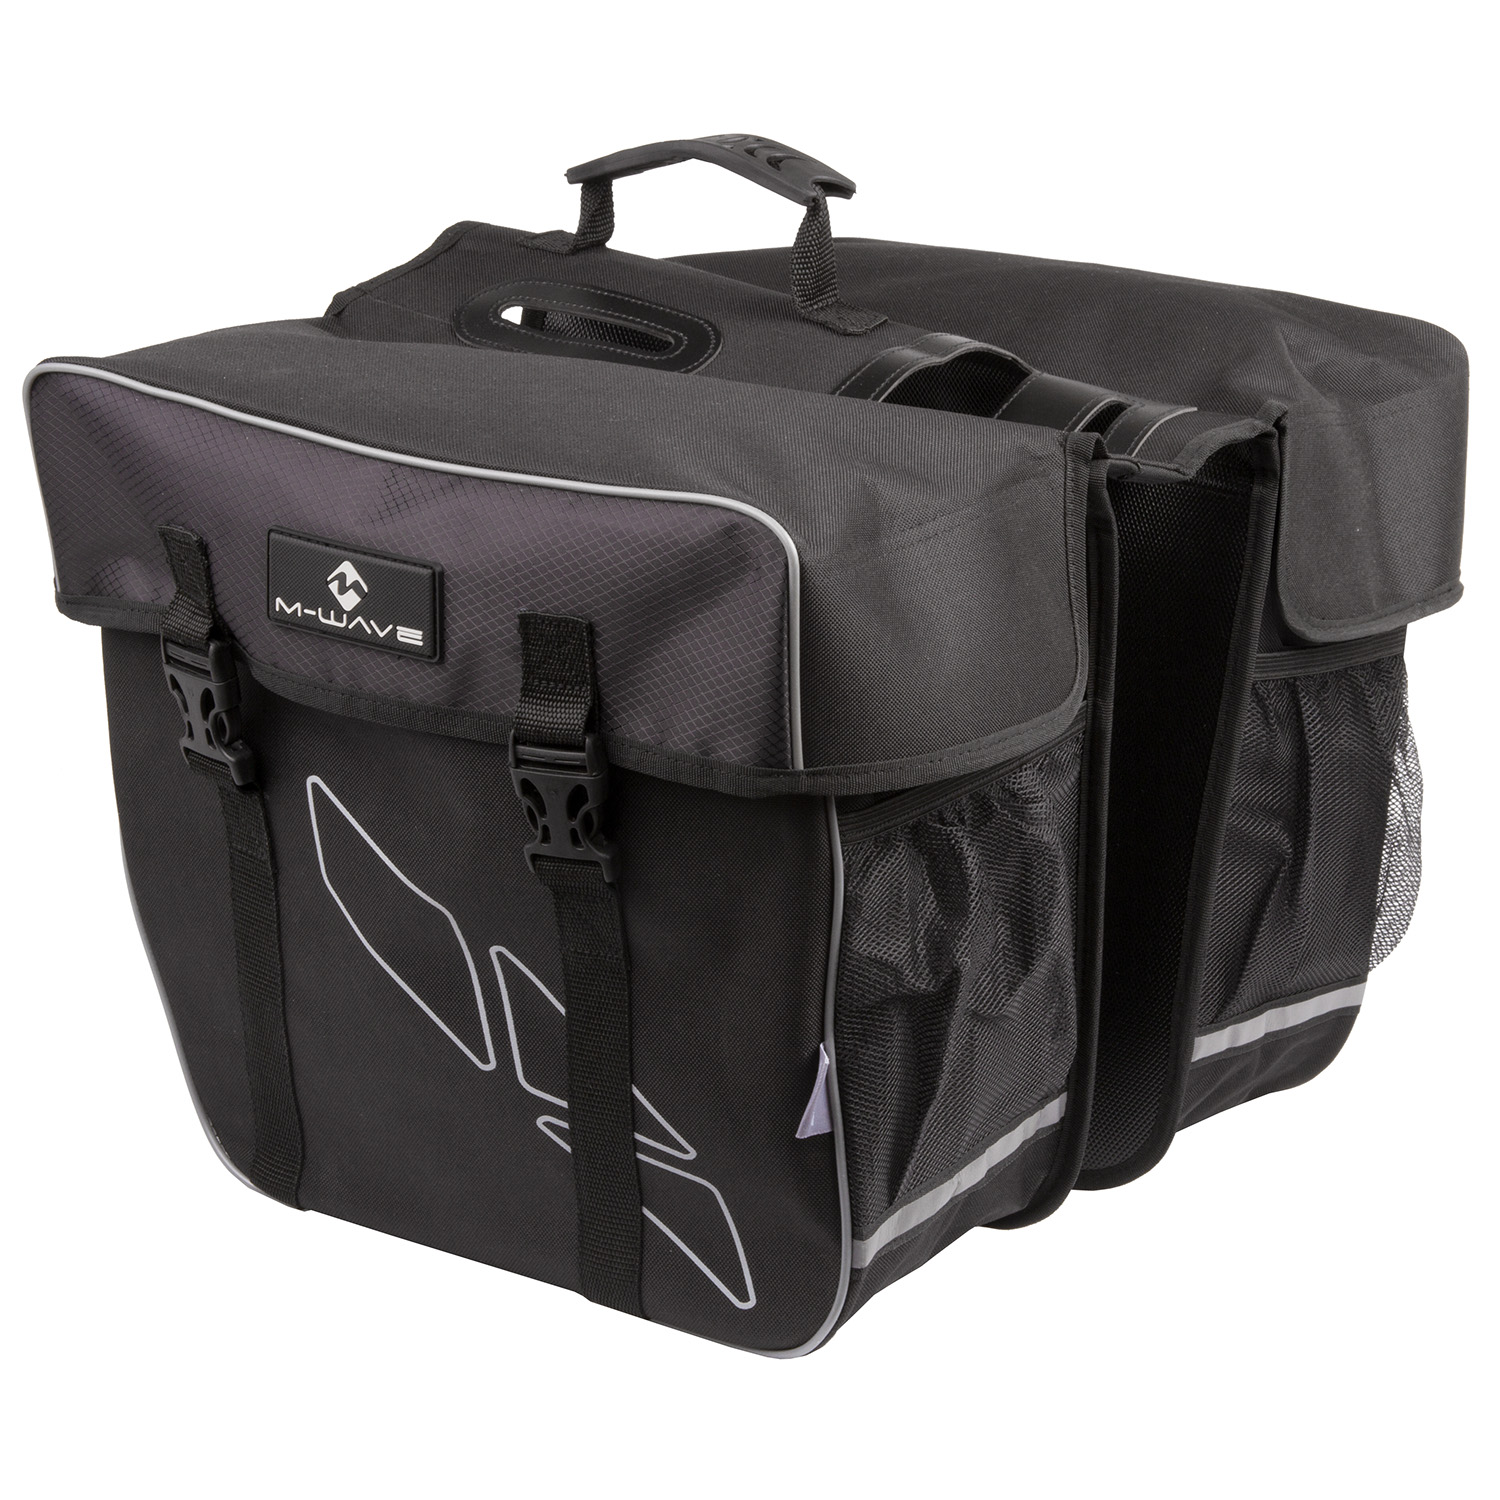 122315-M-WAVE Amsterdam Double pannier bag – AVAILABLE IN SELECTED BIKE SHOPS